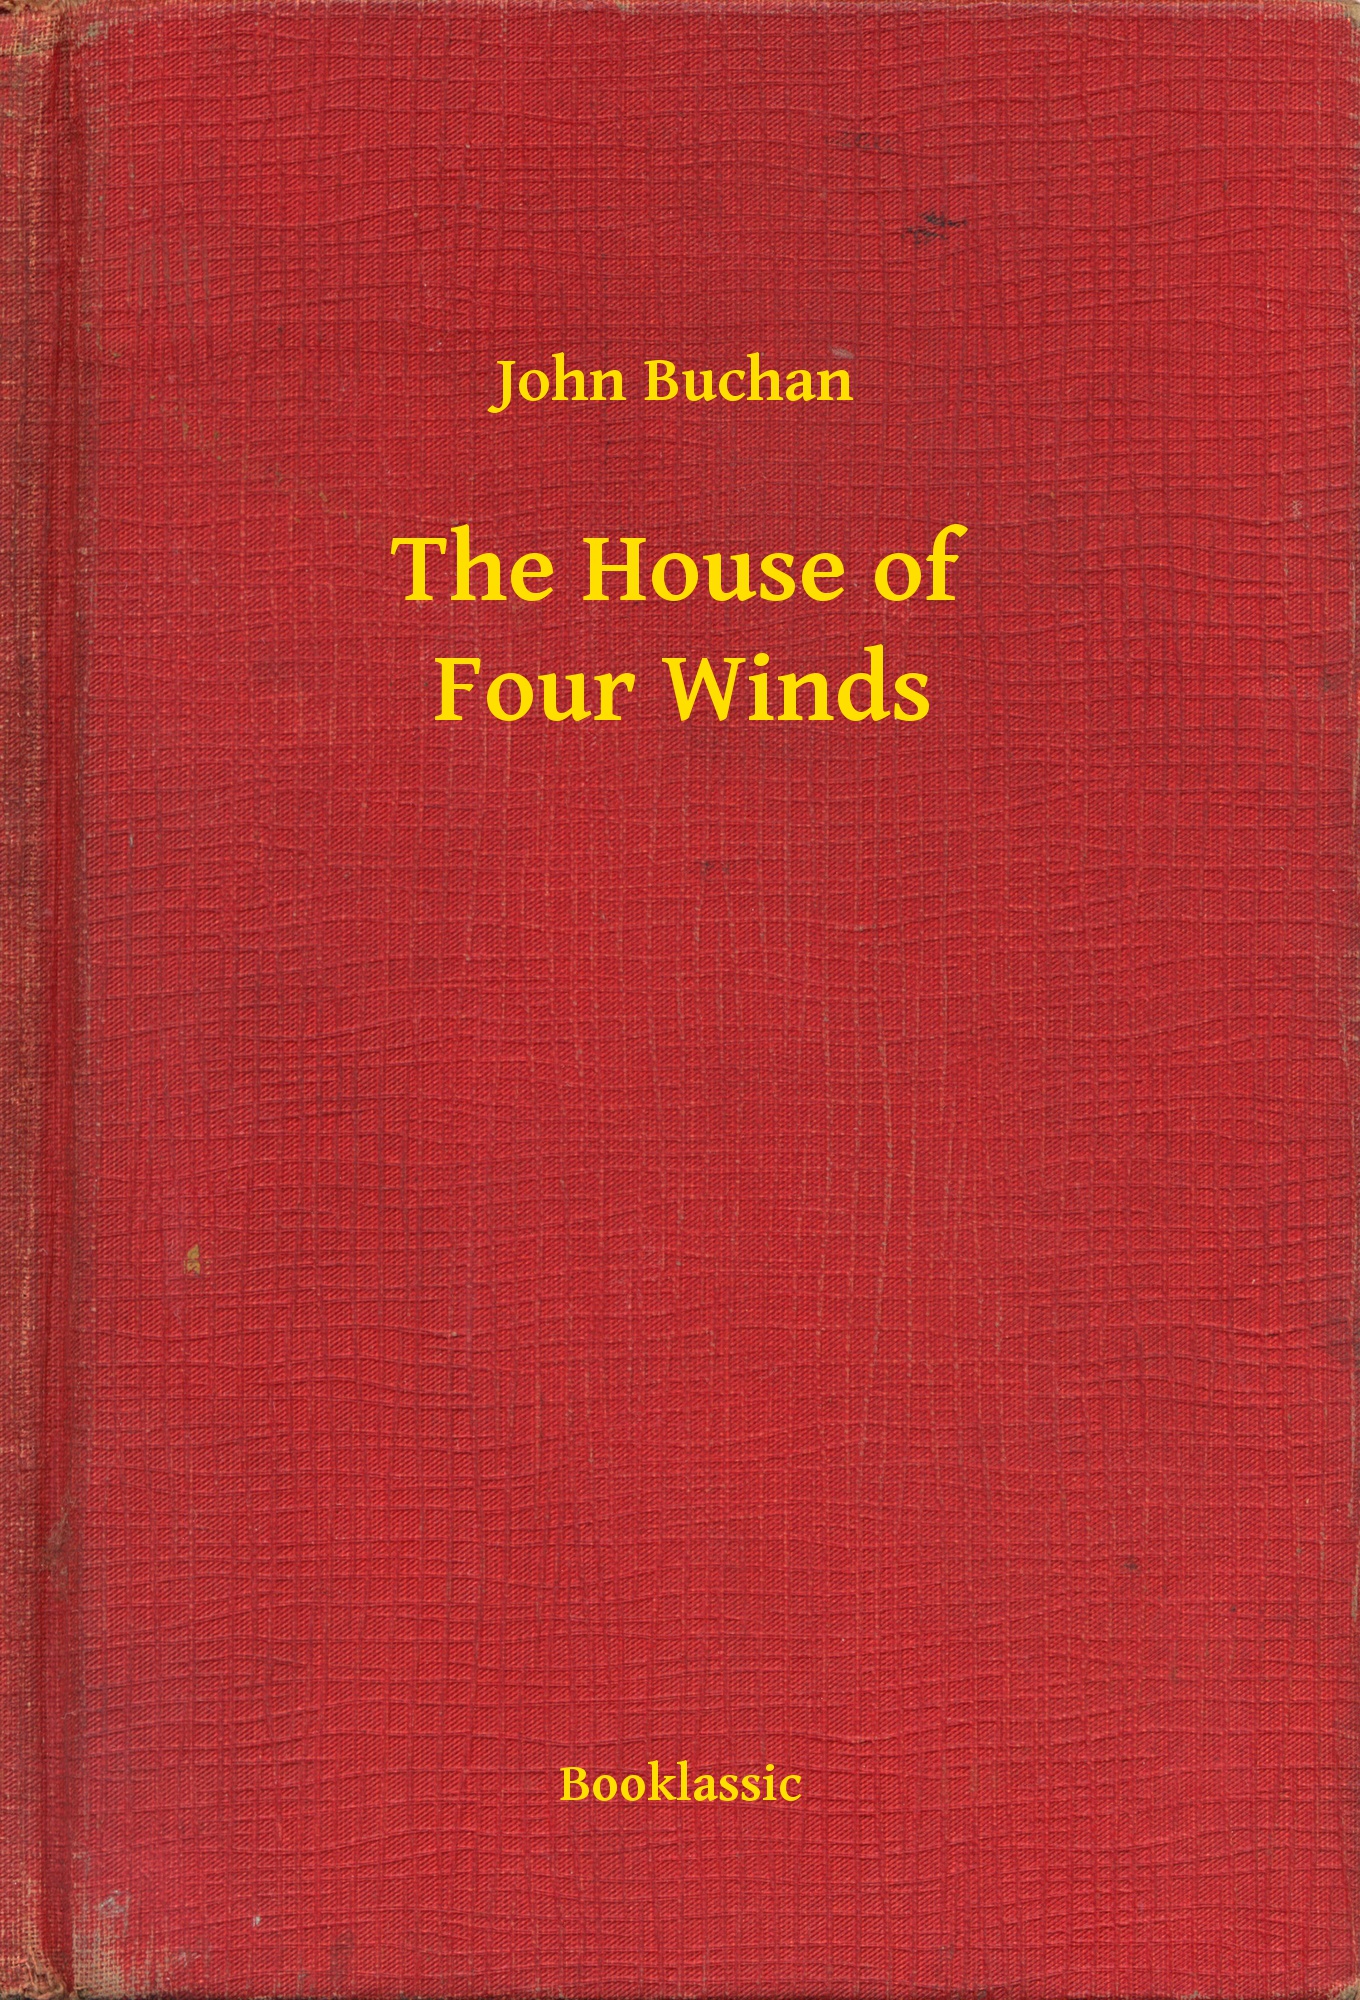 The House of Four Winds